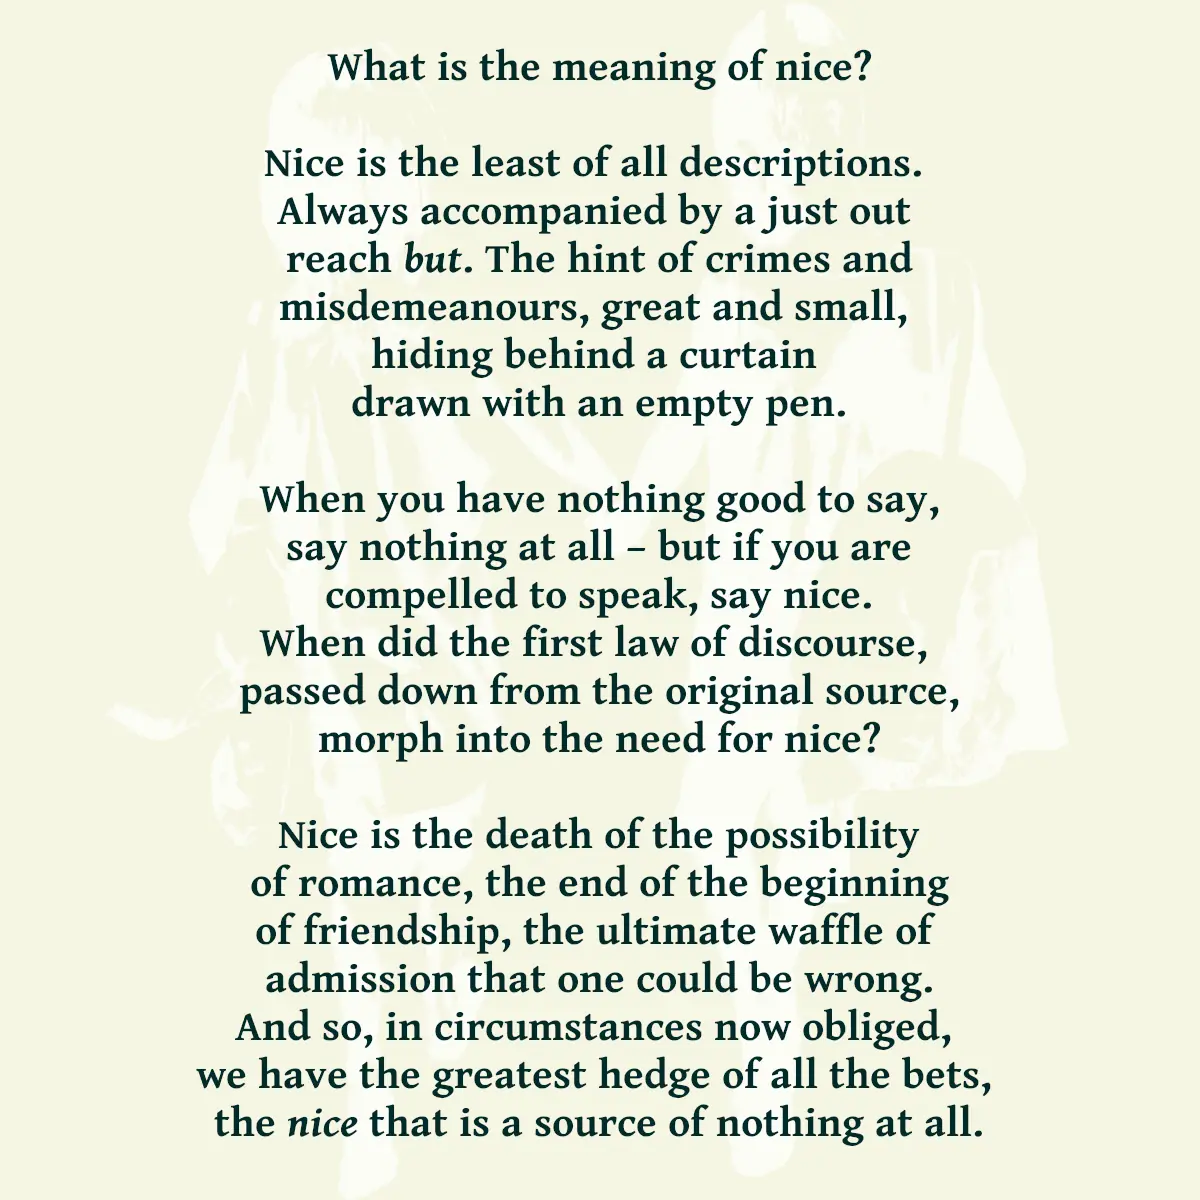 What is the meaning of nice? Nice is the least of all descriptions.  Always accompanied by a just out  reach but. The hint of crimes and misdemeanours, great and small,  hiding behind a curtain  drawn with an empty pen. When you have nothing good to say, say nothing at all -  but if you are compelled to speak, say nice. When did the first law of discourse,  passed down from the original source, morph into the need for nice? Nice is the death of the possibility of romance, the end of the beginning of friendship, the ultimate waffle of  admission that one could be wrong. And so, in circumstances now obliged,  we have the greatest hedge of all the bets,  the nice that is a source of nothing at all.